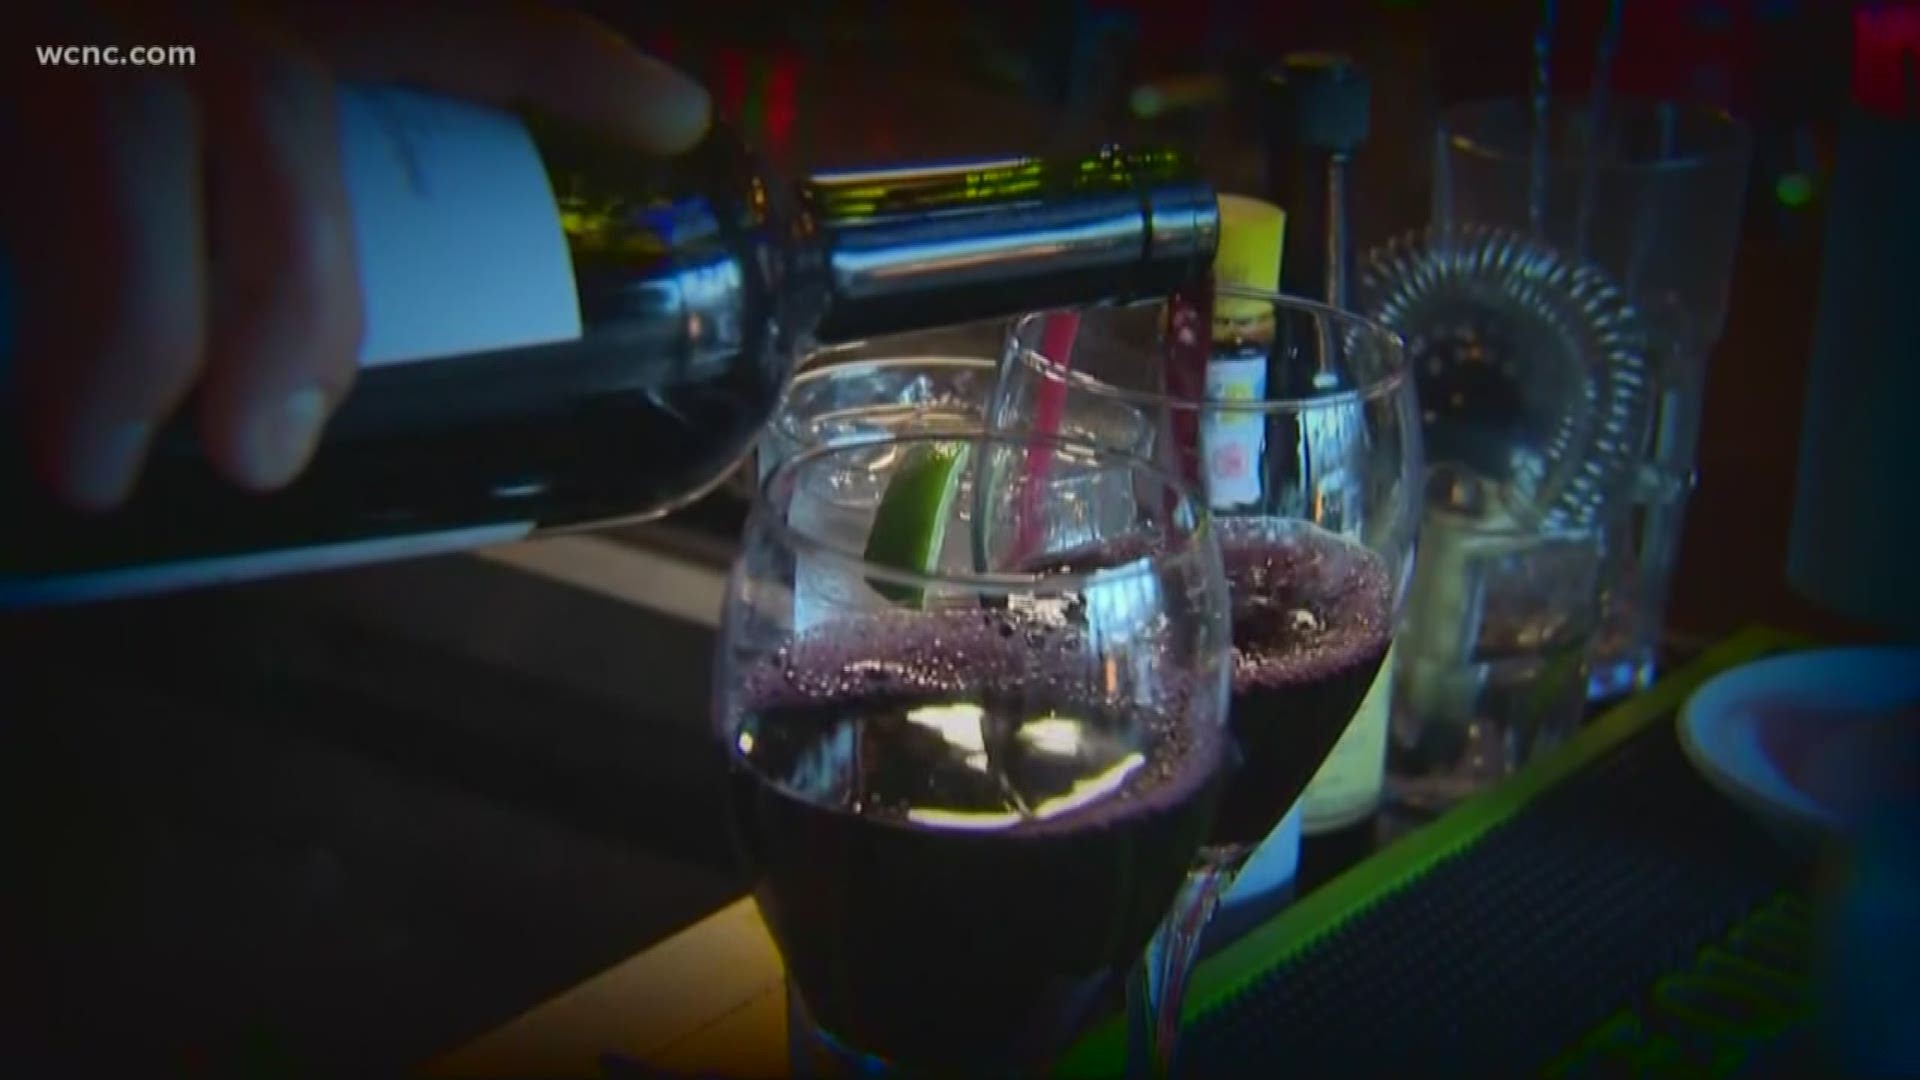 A new report of a drink being spiked at a local bar is highlighting loopholes in a North Carolina law. Police said a 22-year-old woman had an unknown substance added to her drink in Plaza Midwood.